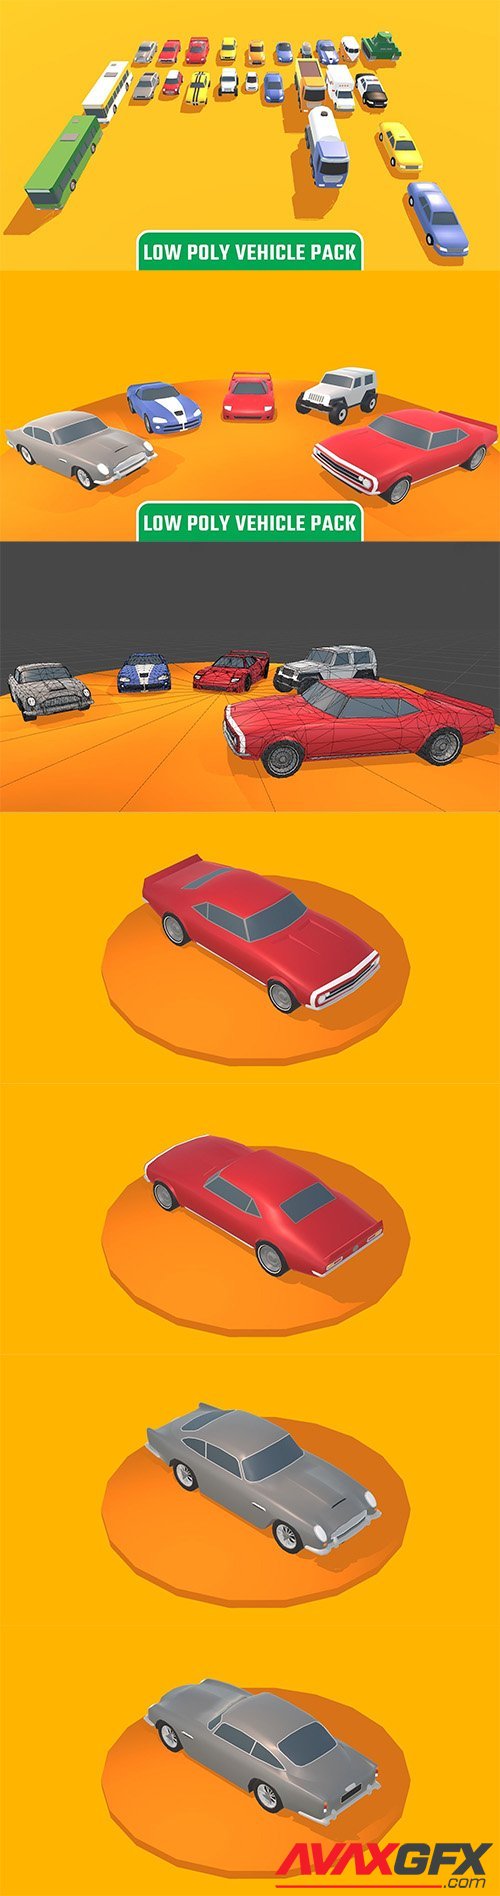 Low Poly Vehicle Pack Low-poly 3D model